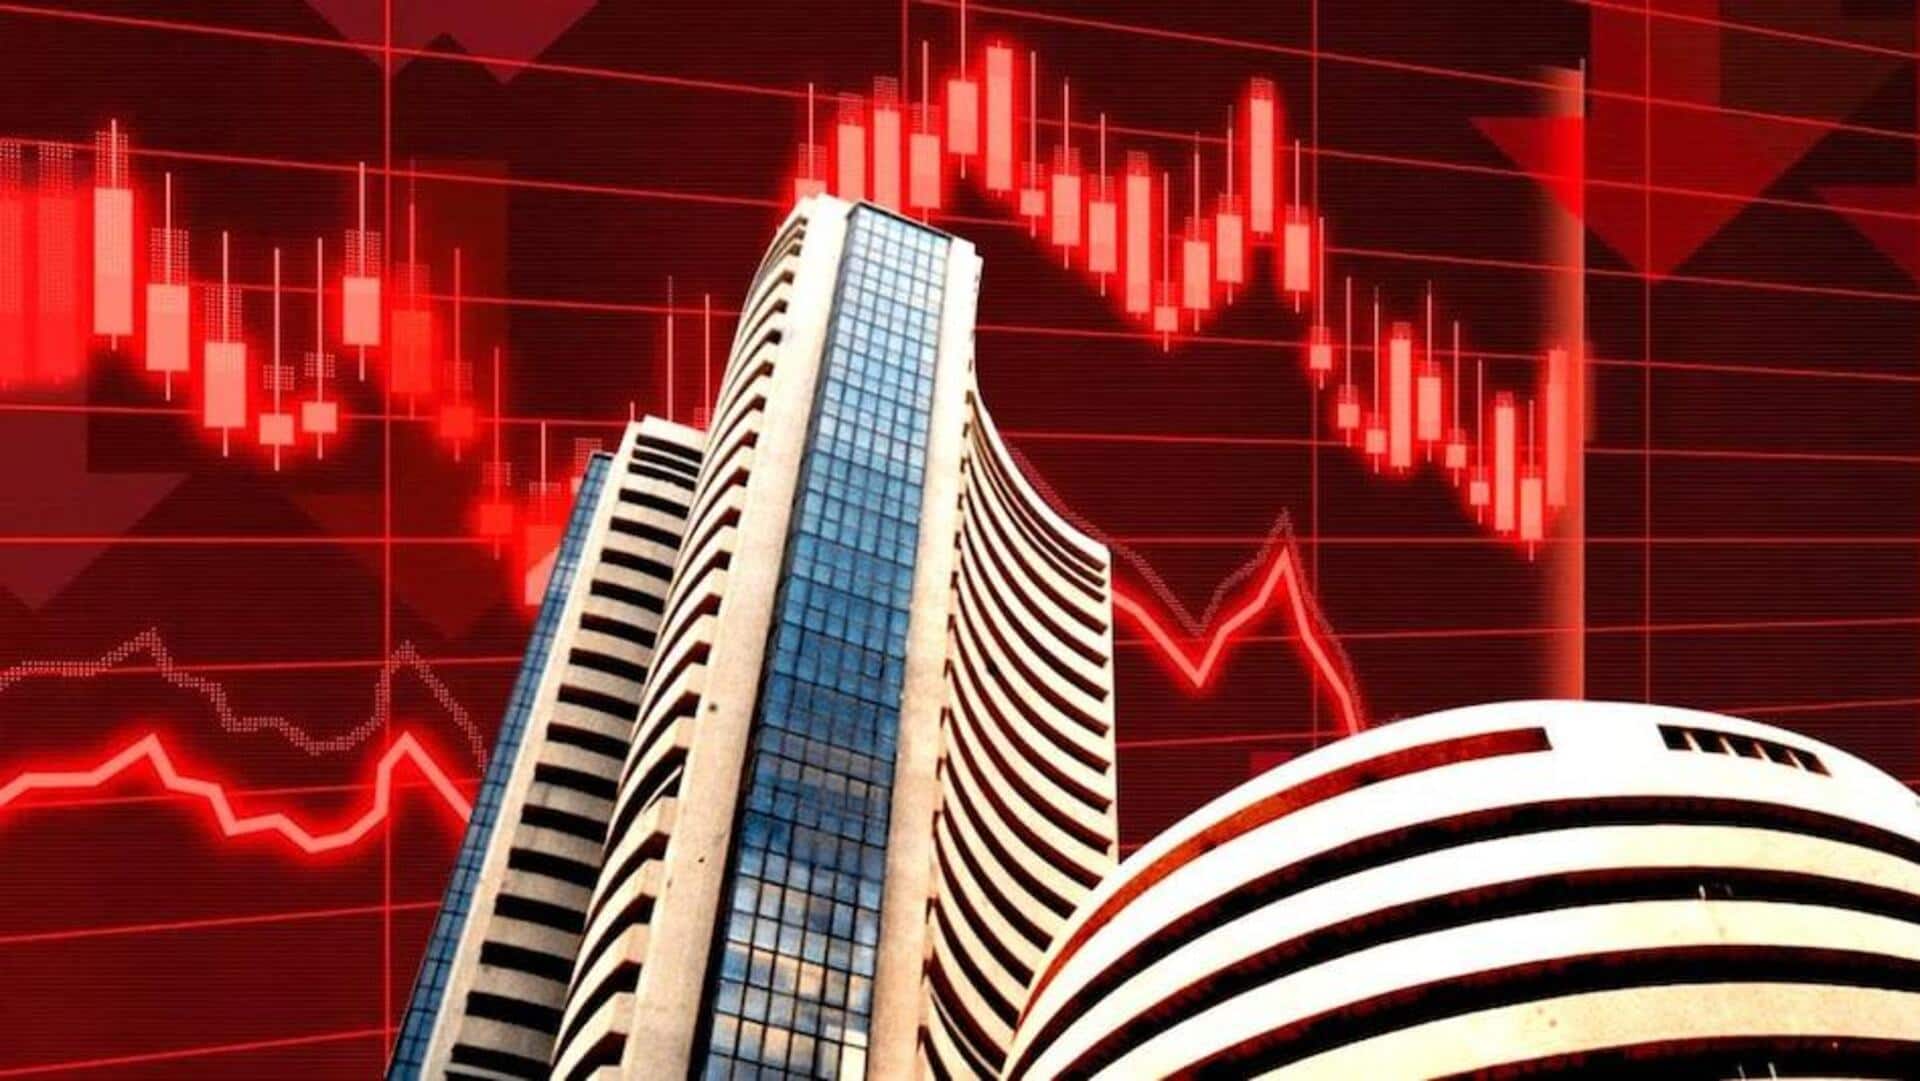 Nifty, Sensex decline for 3rd consecutive session: Here's why